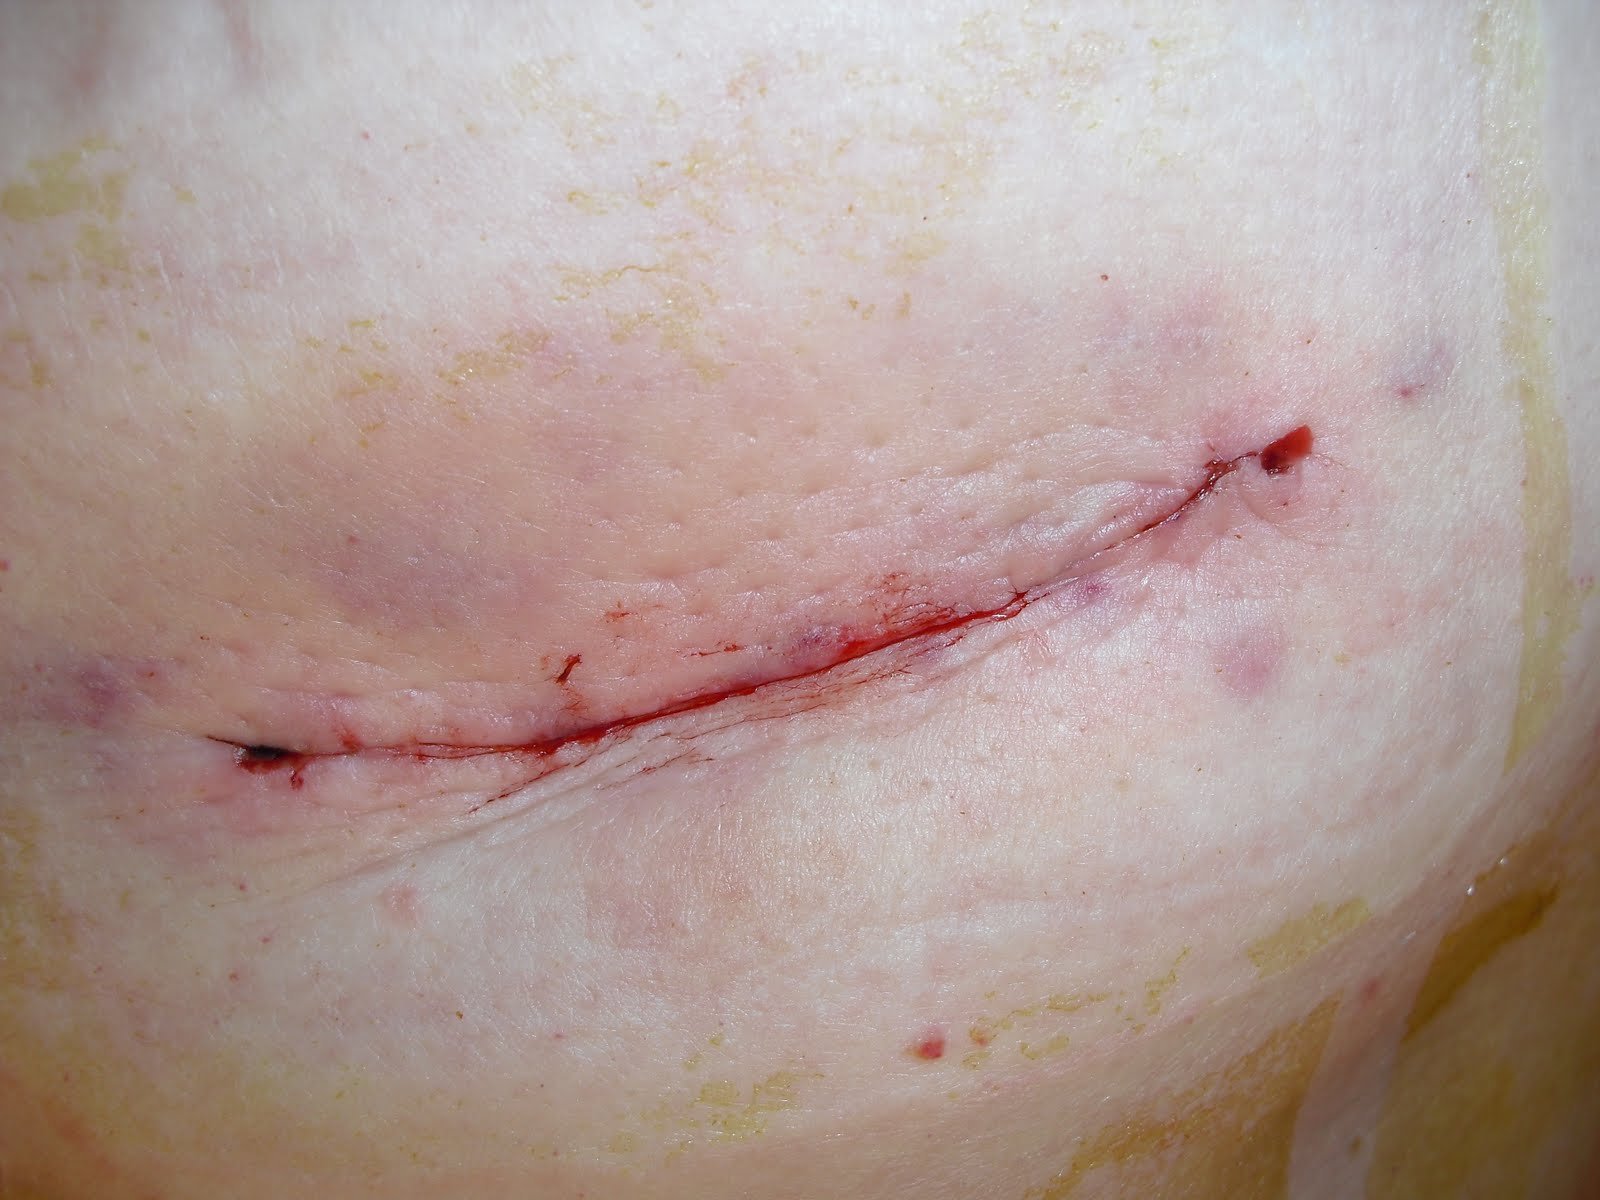 Post Surgery Incision Infection Signs | LIVESTRONG.COM